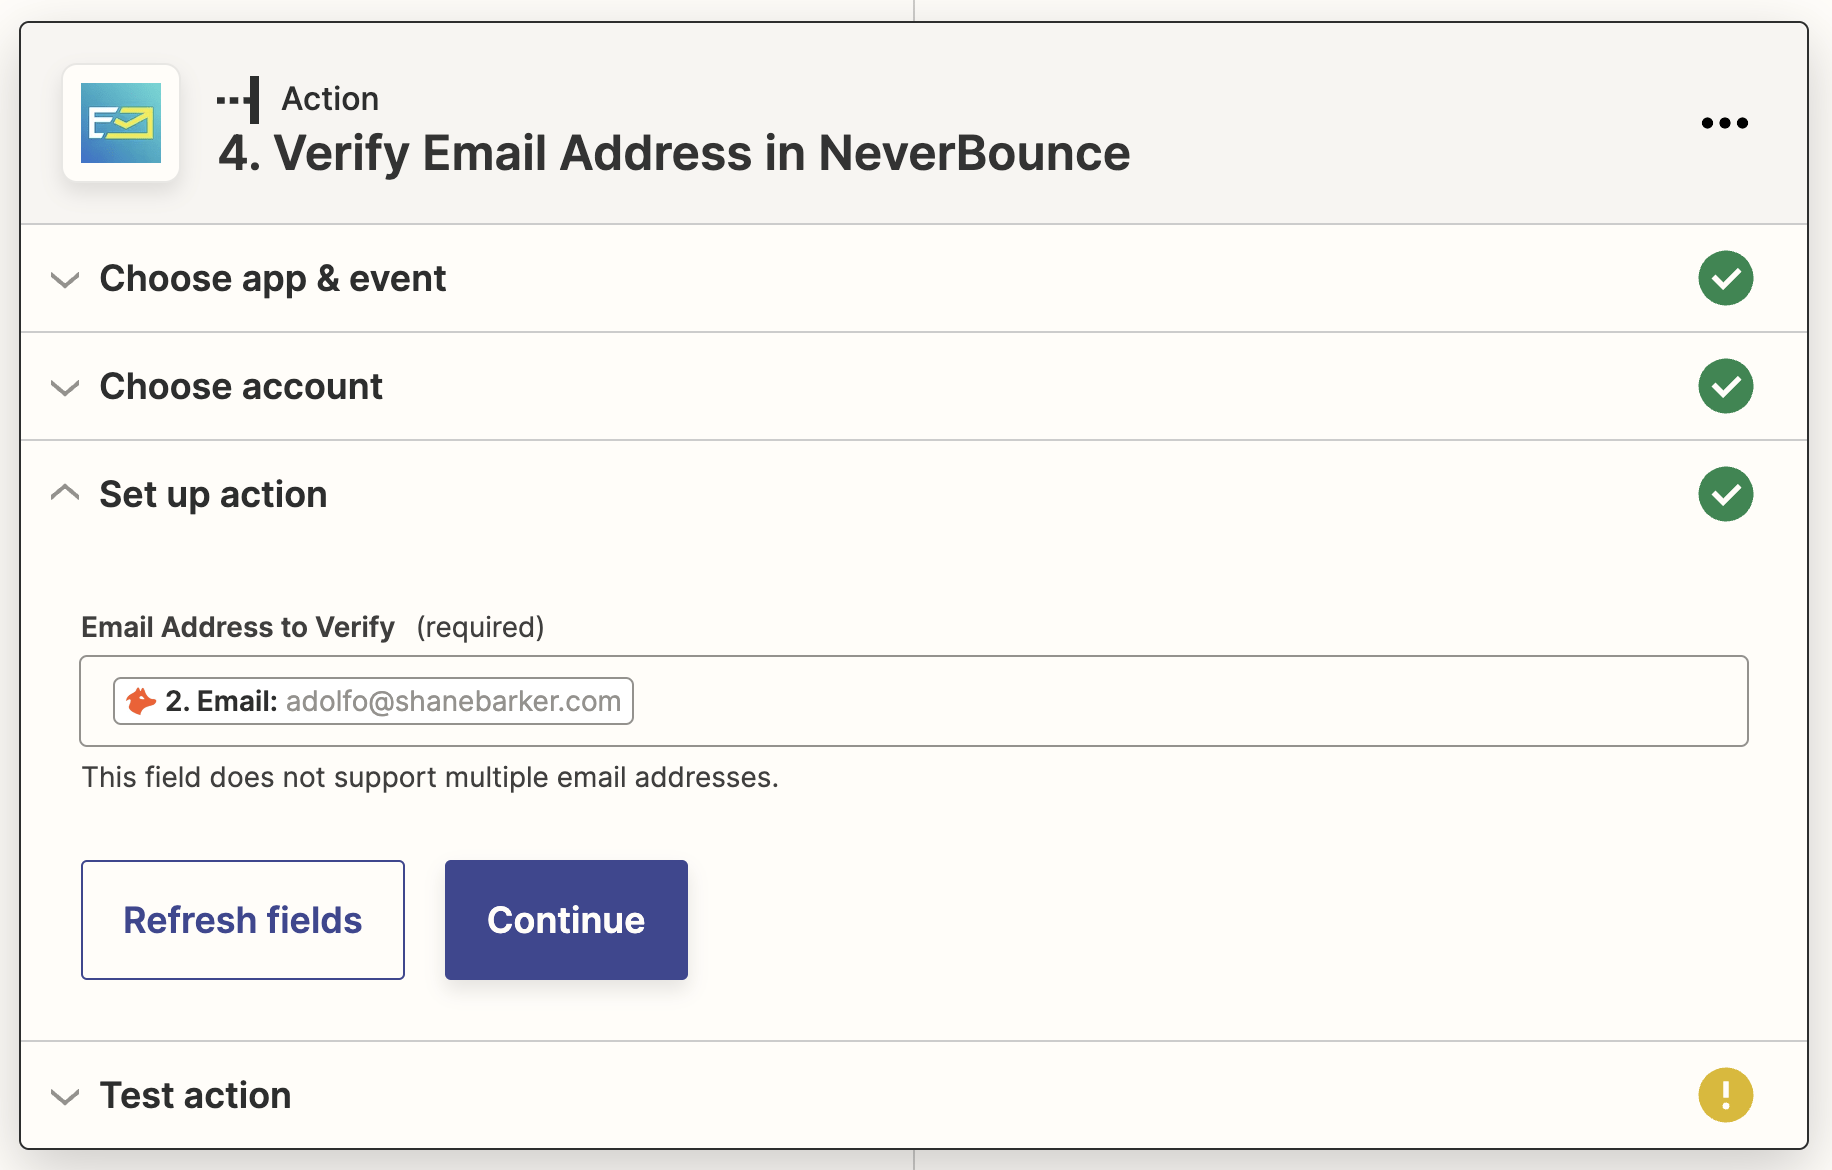 Action step: Verify Email Address in NeverBounce